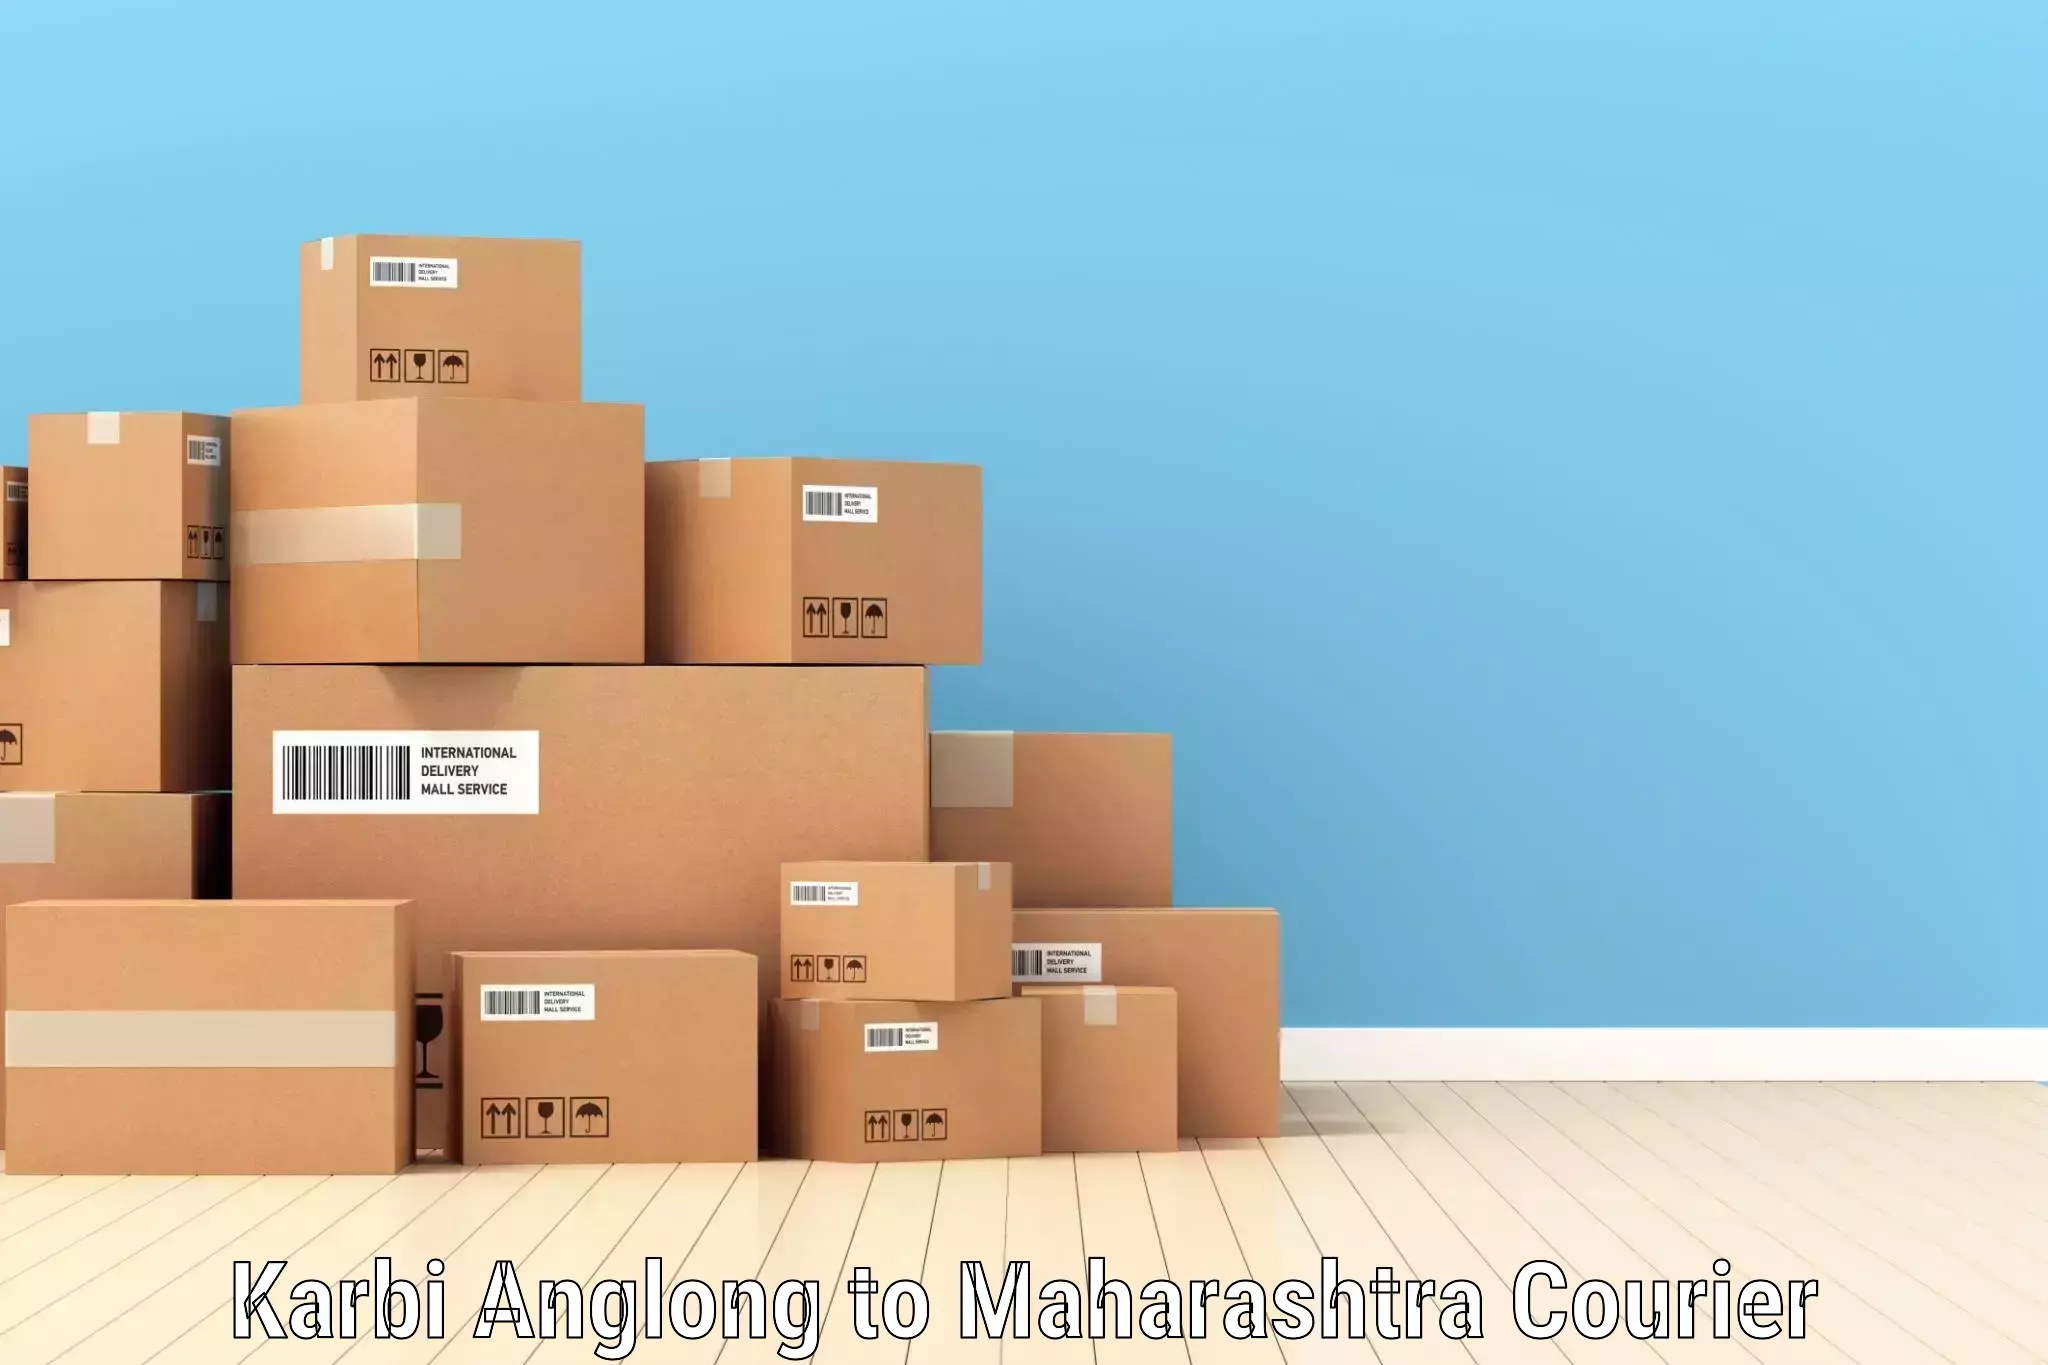 High-capacity courier solutions Karbi Anglong to Daund